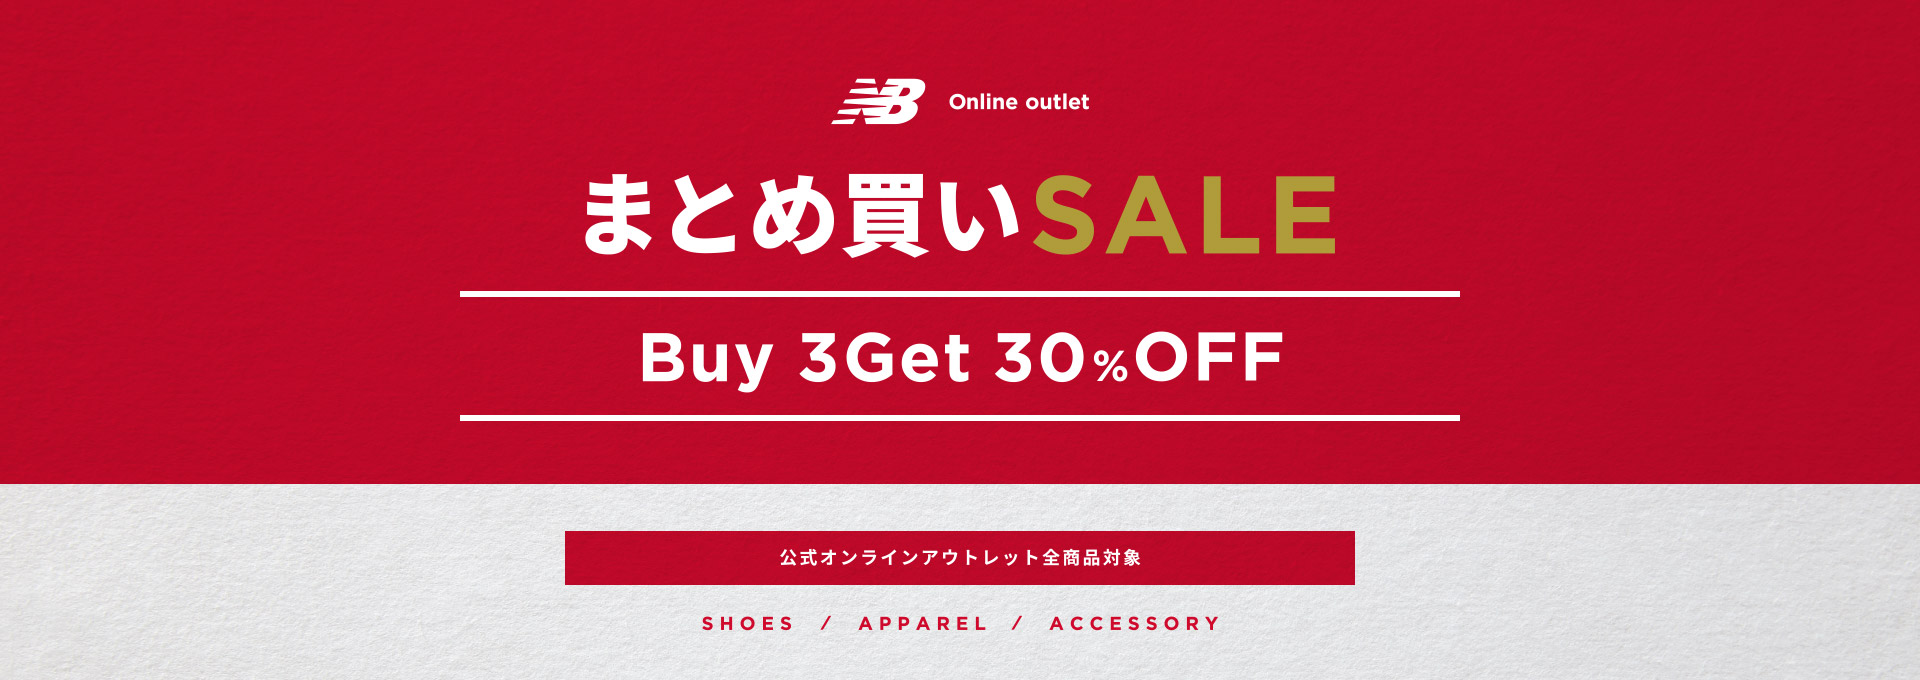 NB Online outlet まとめ買いSale. 公式オンラインアウトレット全商品対象 Buy 3Get 30% Off.